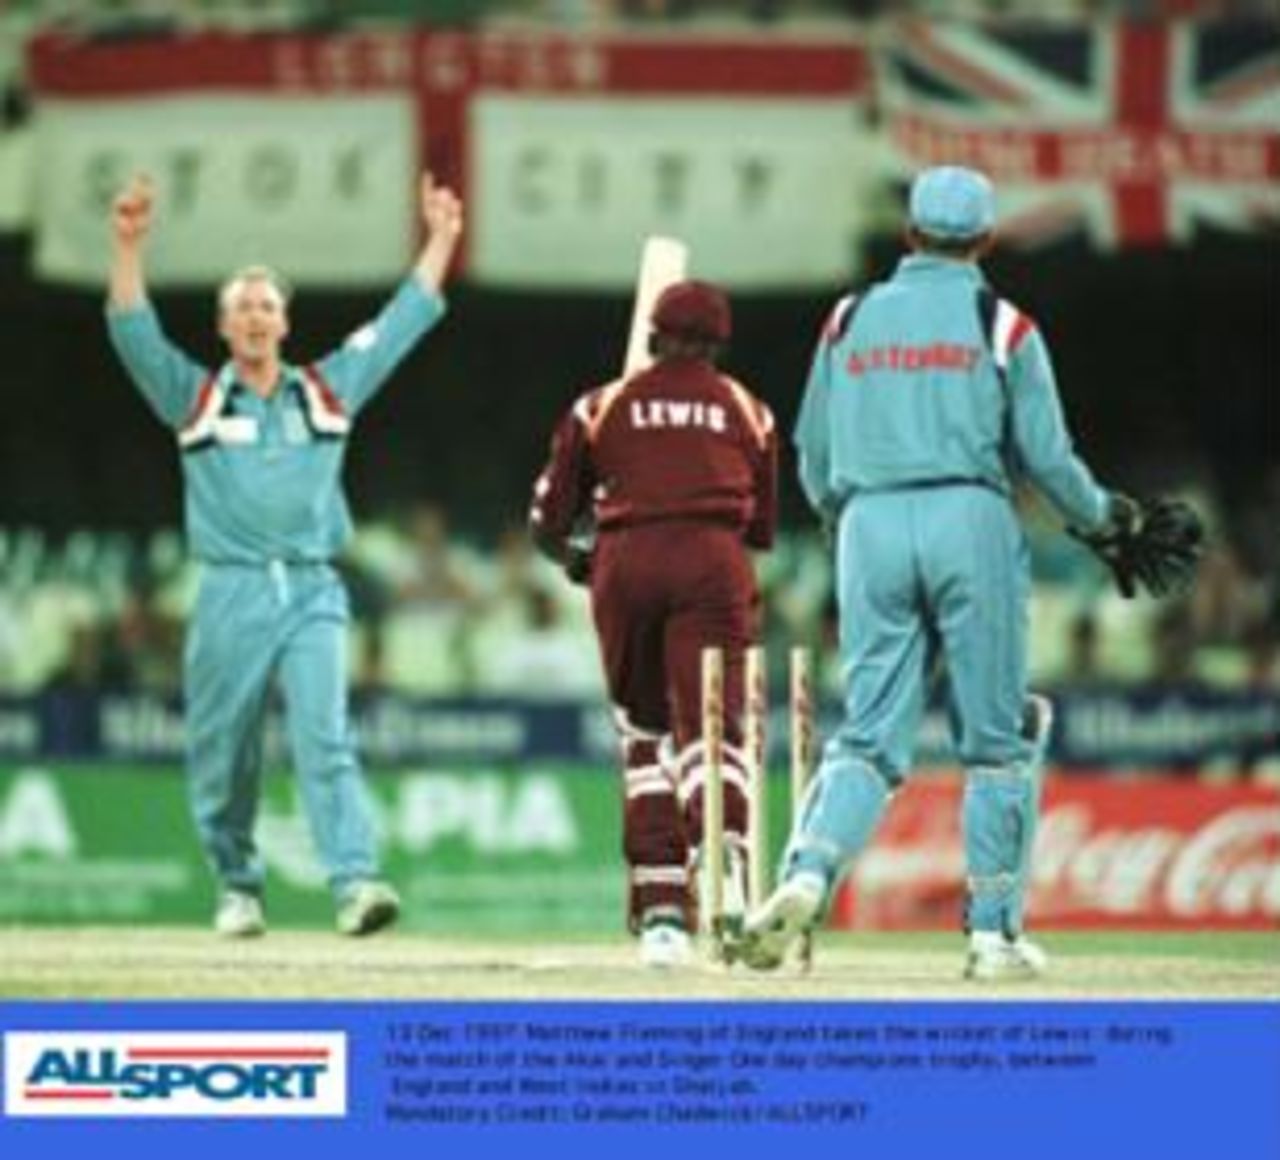 Matthew Fleming takes the wicket of Lewis during England's match with the West Indies in the Champions Trophy in Sharjah